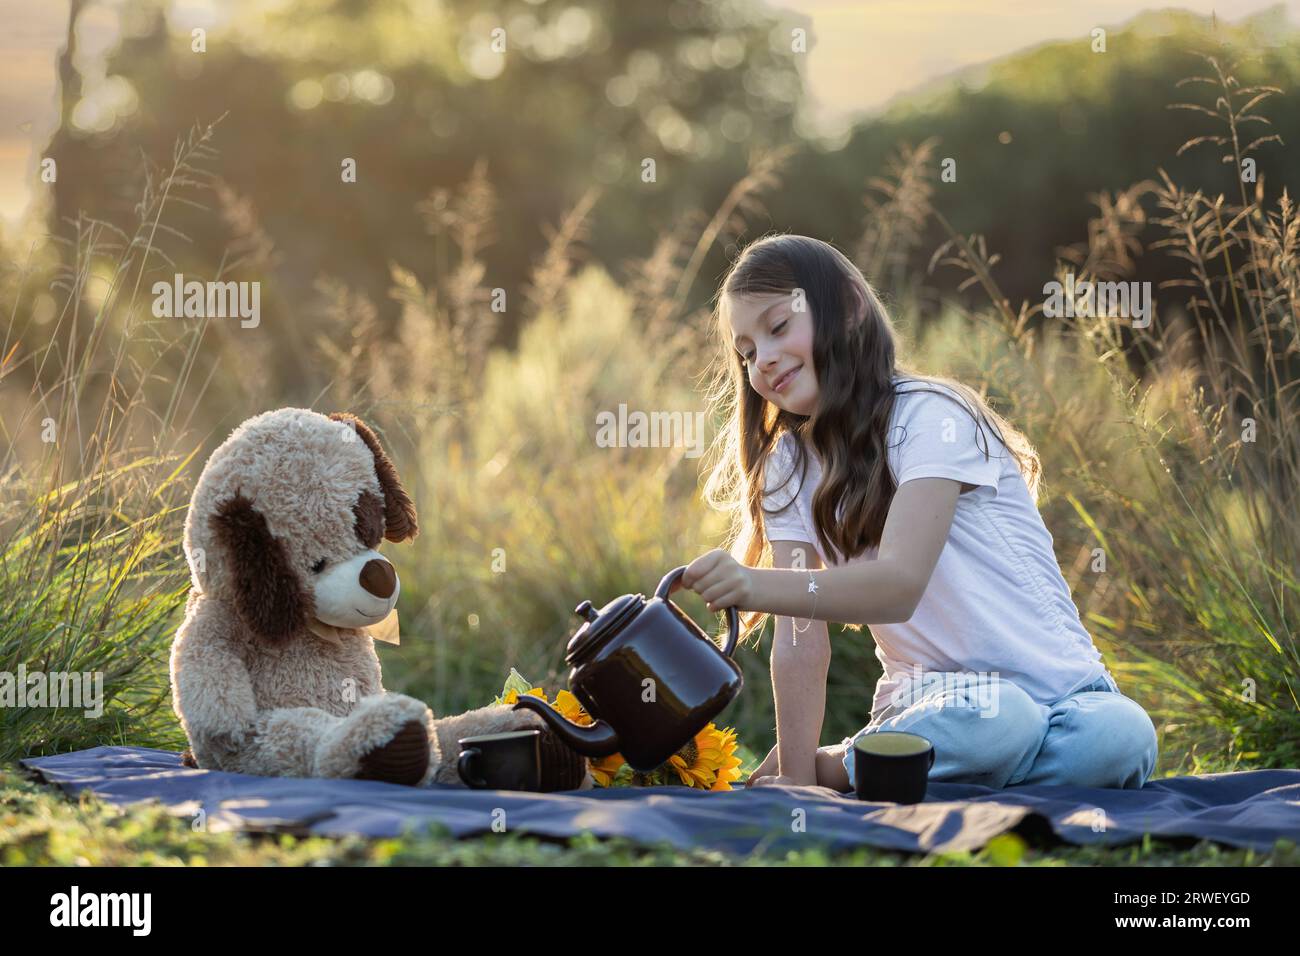 Young Caucasian girl and her teddy having a tea party outdoors in nature Stock Photo